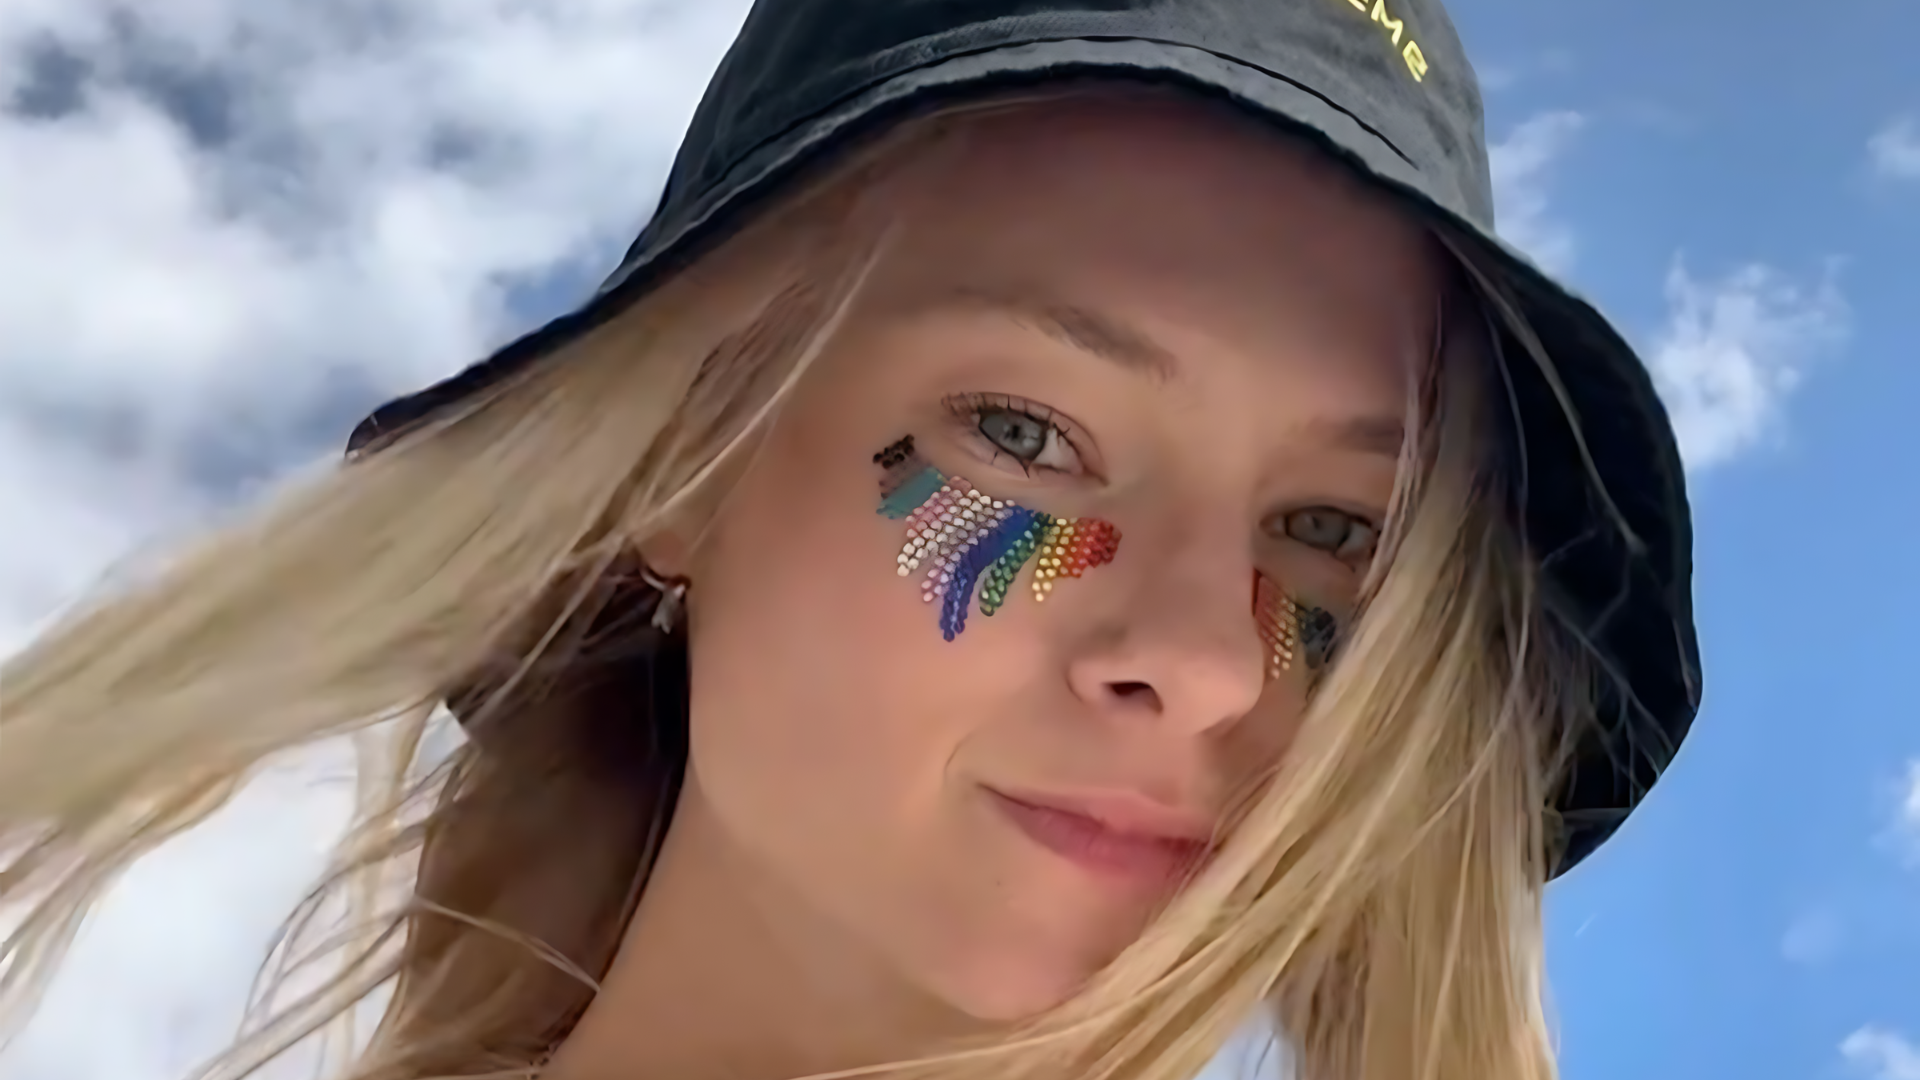 Who Is Jessica Madsen’s Girlfriend? Bridgerton Star Reveals She Is ‘In Love With A Woman’ While Celebrating Pride Month